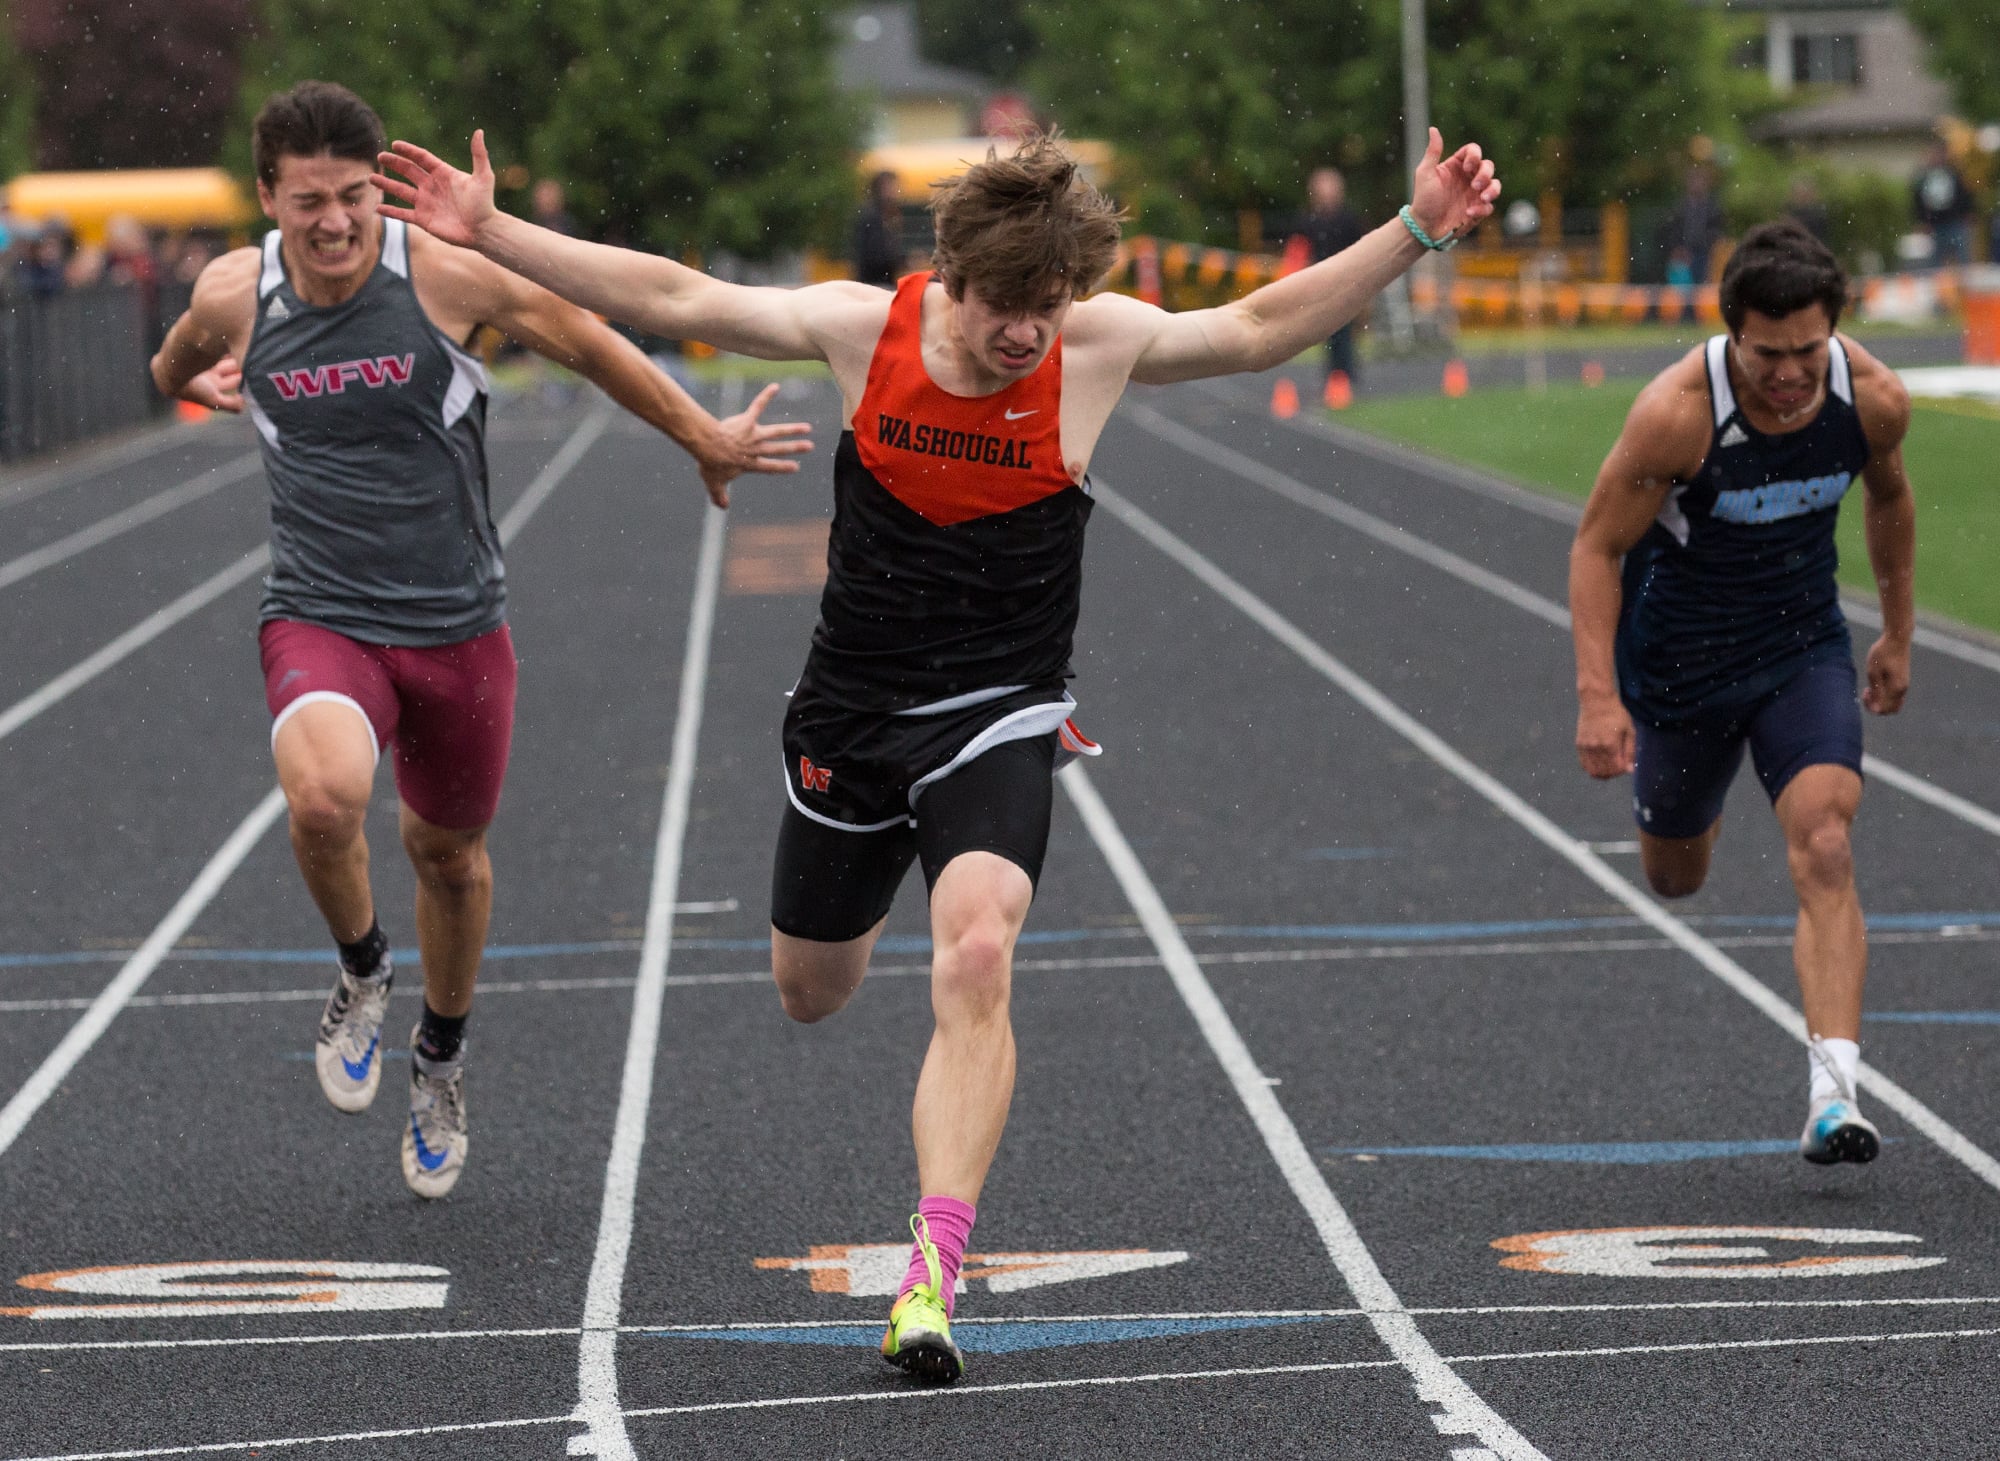 Washougal's Ryan Davy (center) stretches past the finish line as he wins the boys 100-meter run during the 2A District Track and Field Championships at Washougal High School, Friday, May 17, 2019.